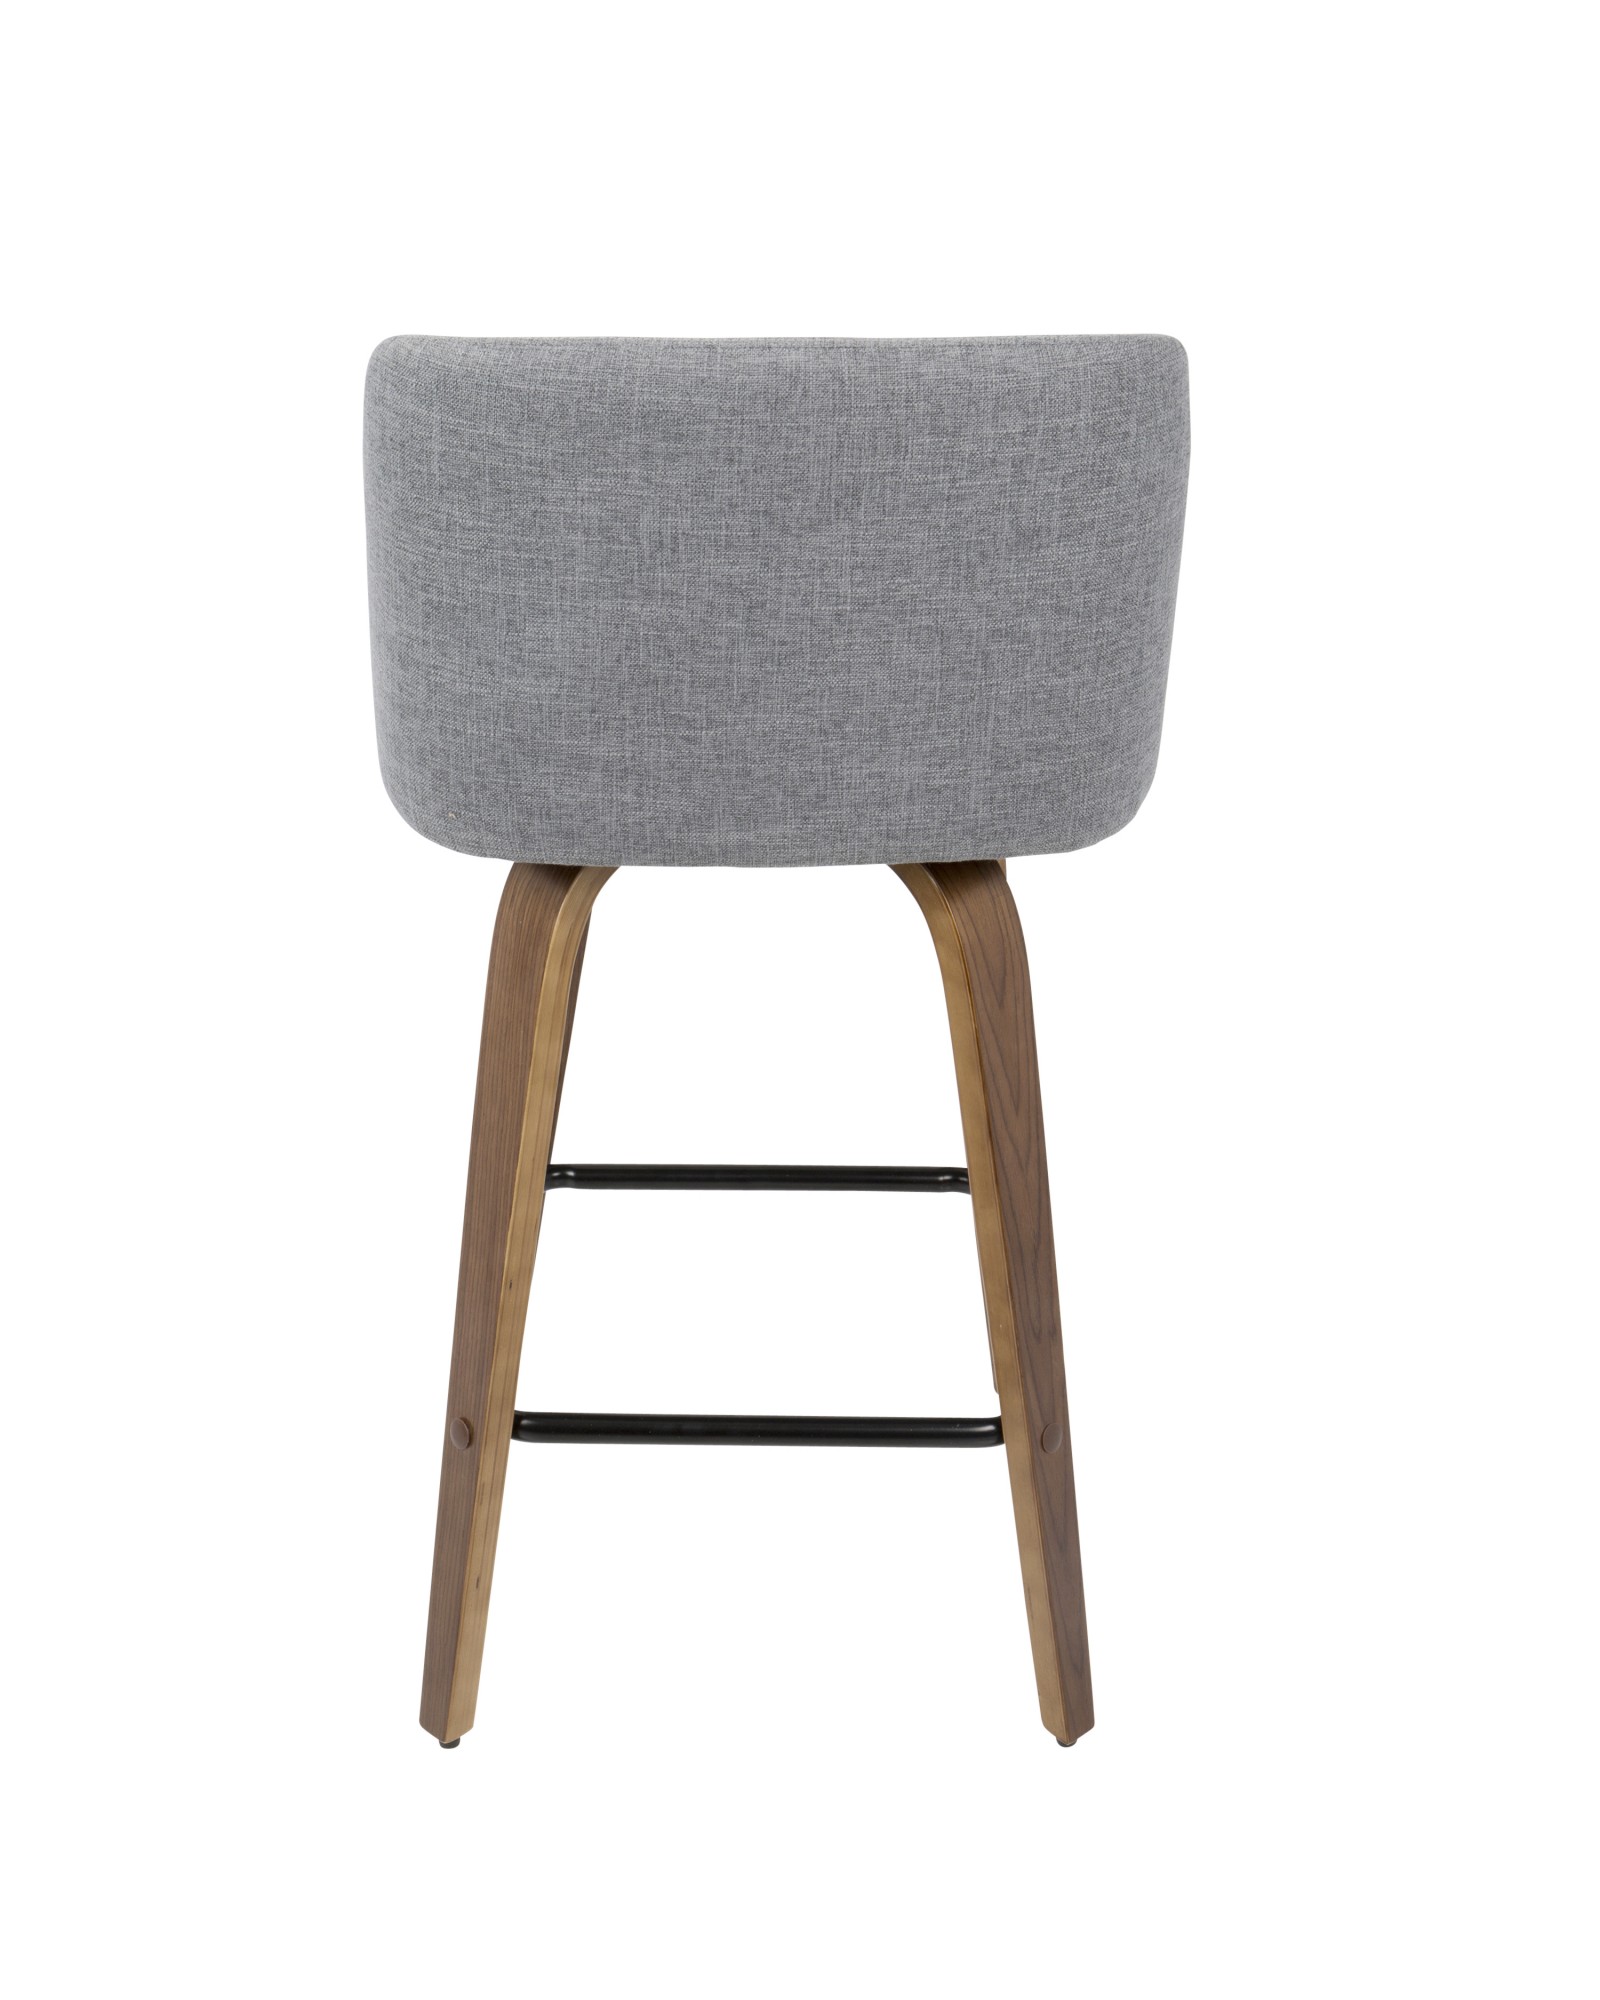 Toriano Mid-Century Modern Counter Stool in Walnut and Grey Fabric